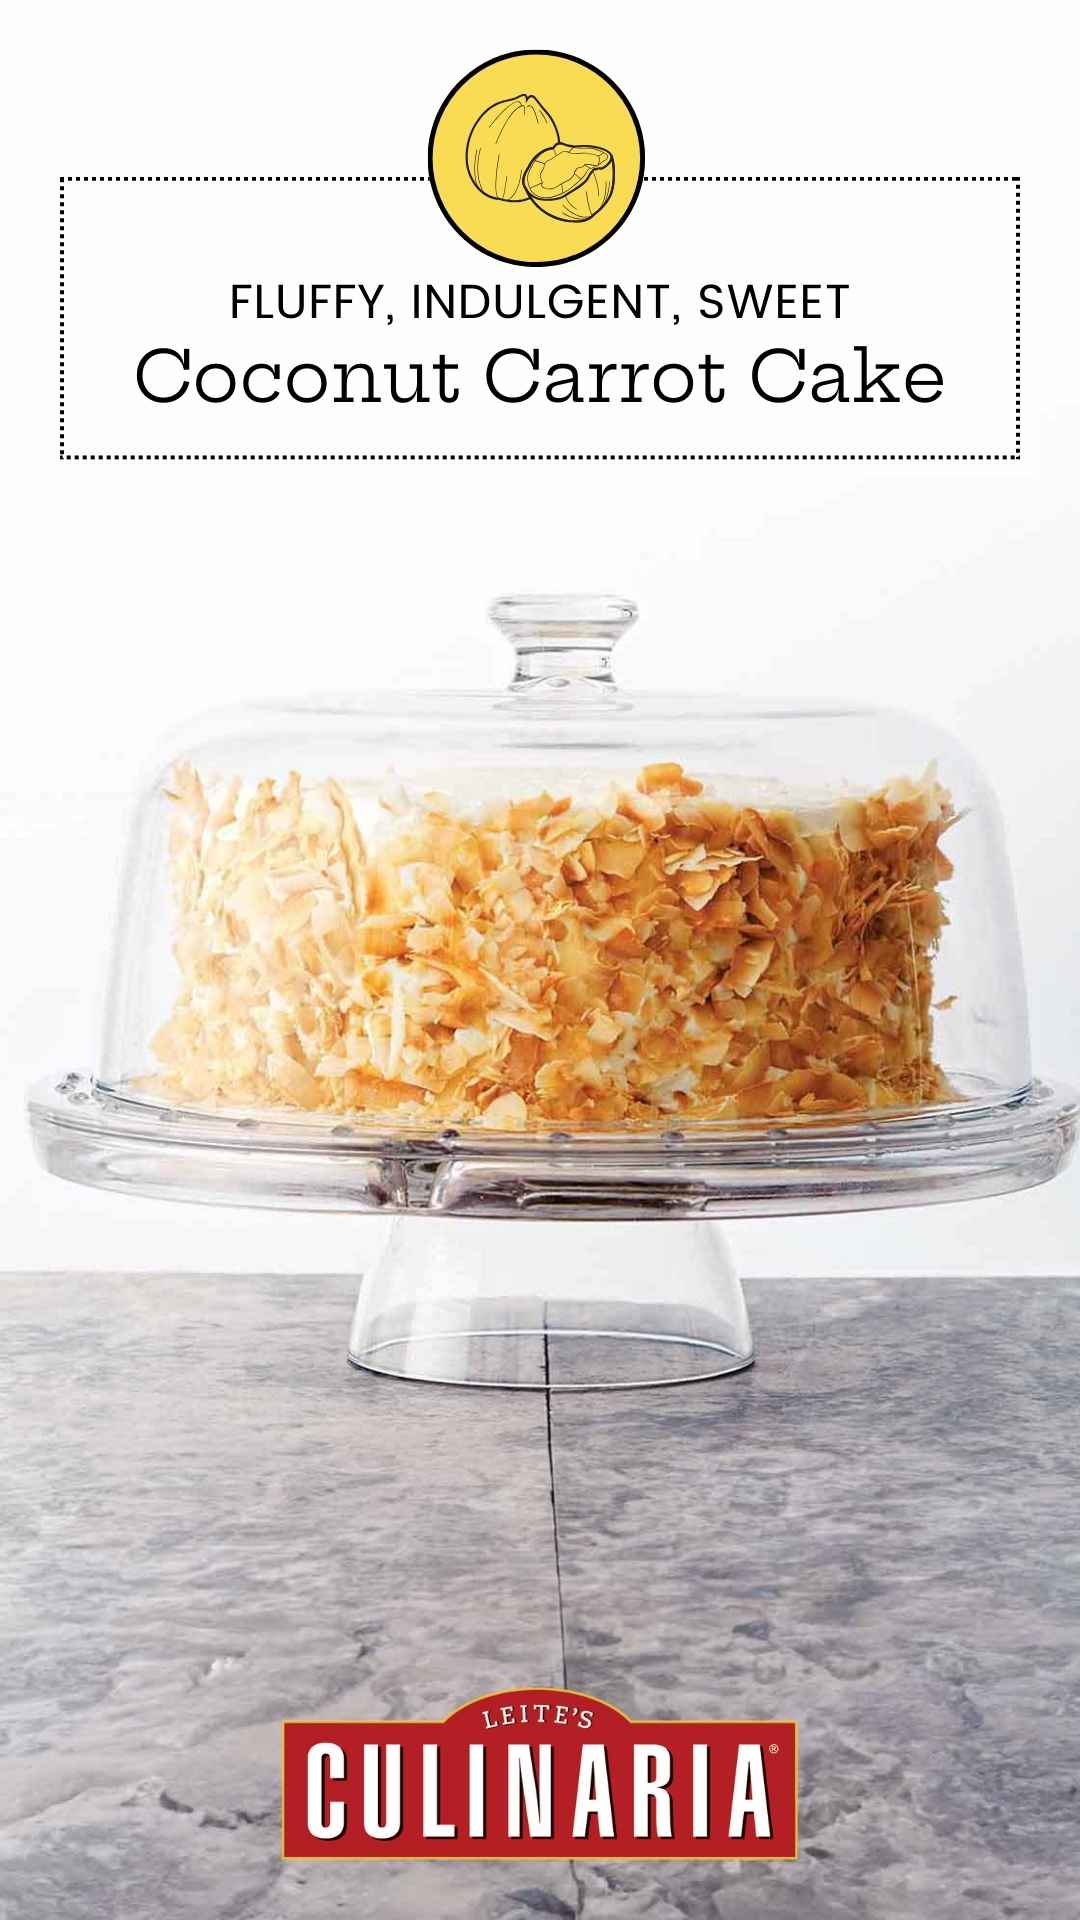 A carrot cake covered in toasted coconut flakes on a glass cake stand, covered with a glass dome.